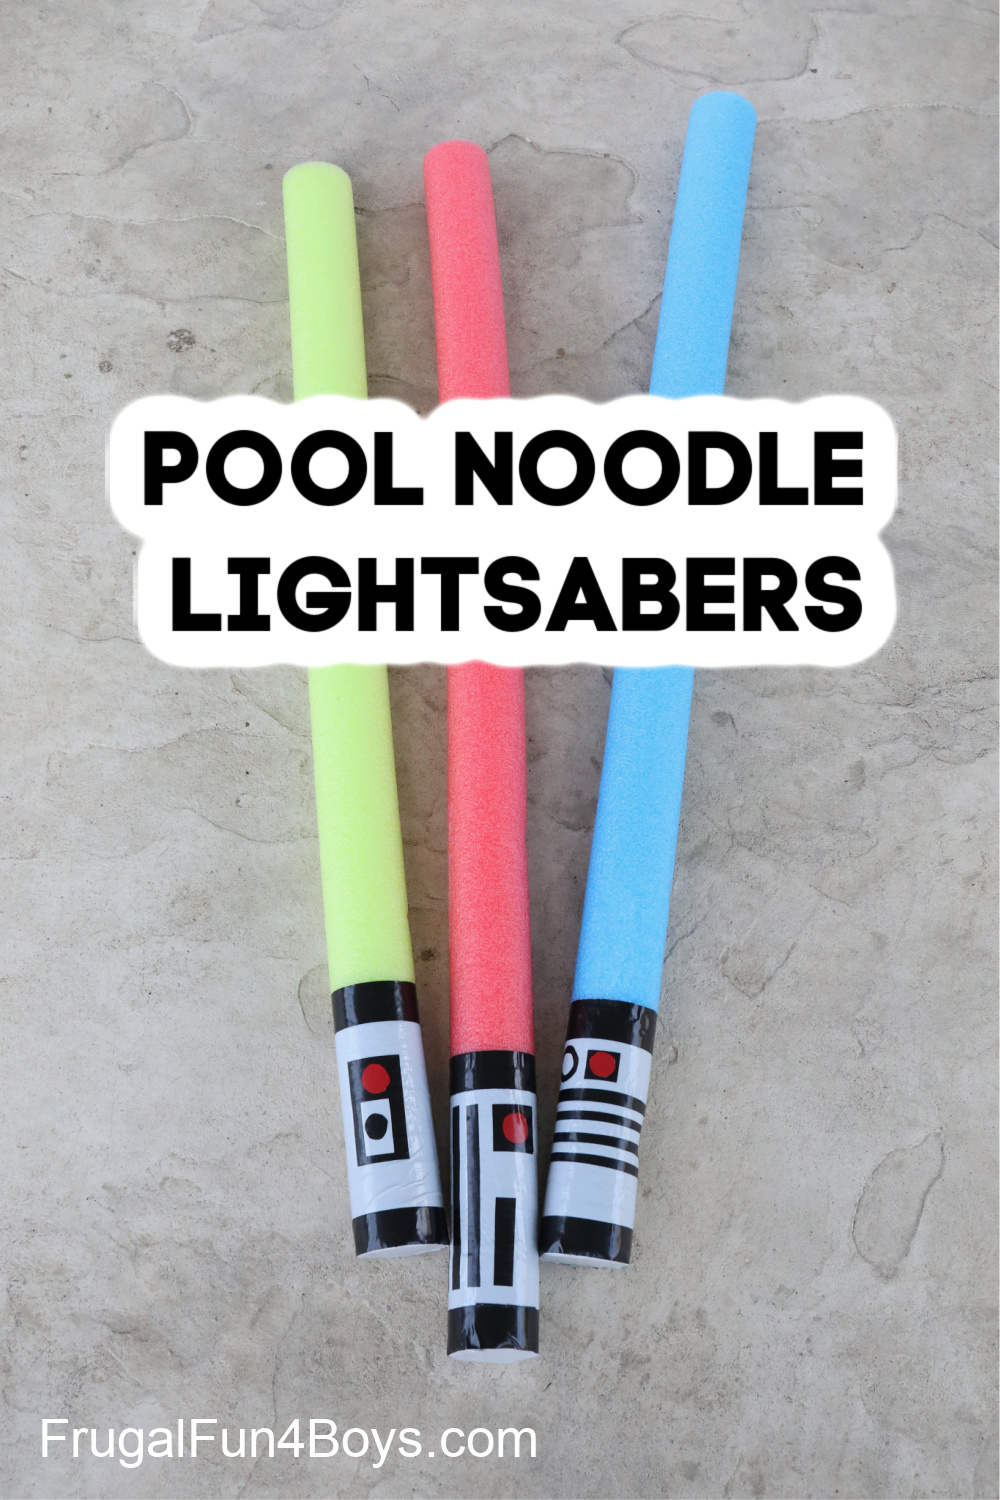 How to make pool noodle lightsabers